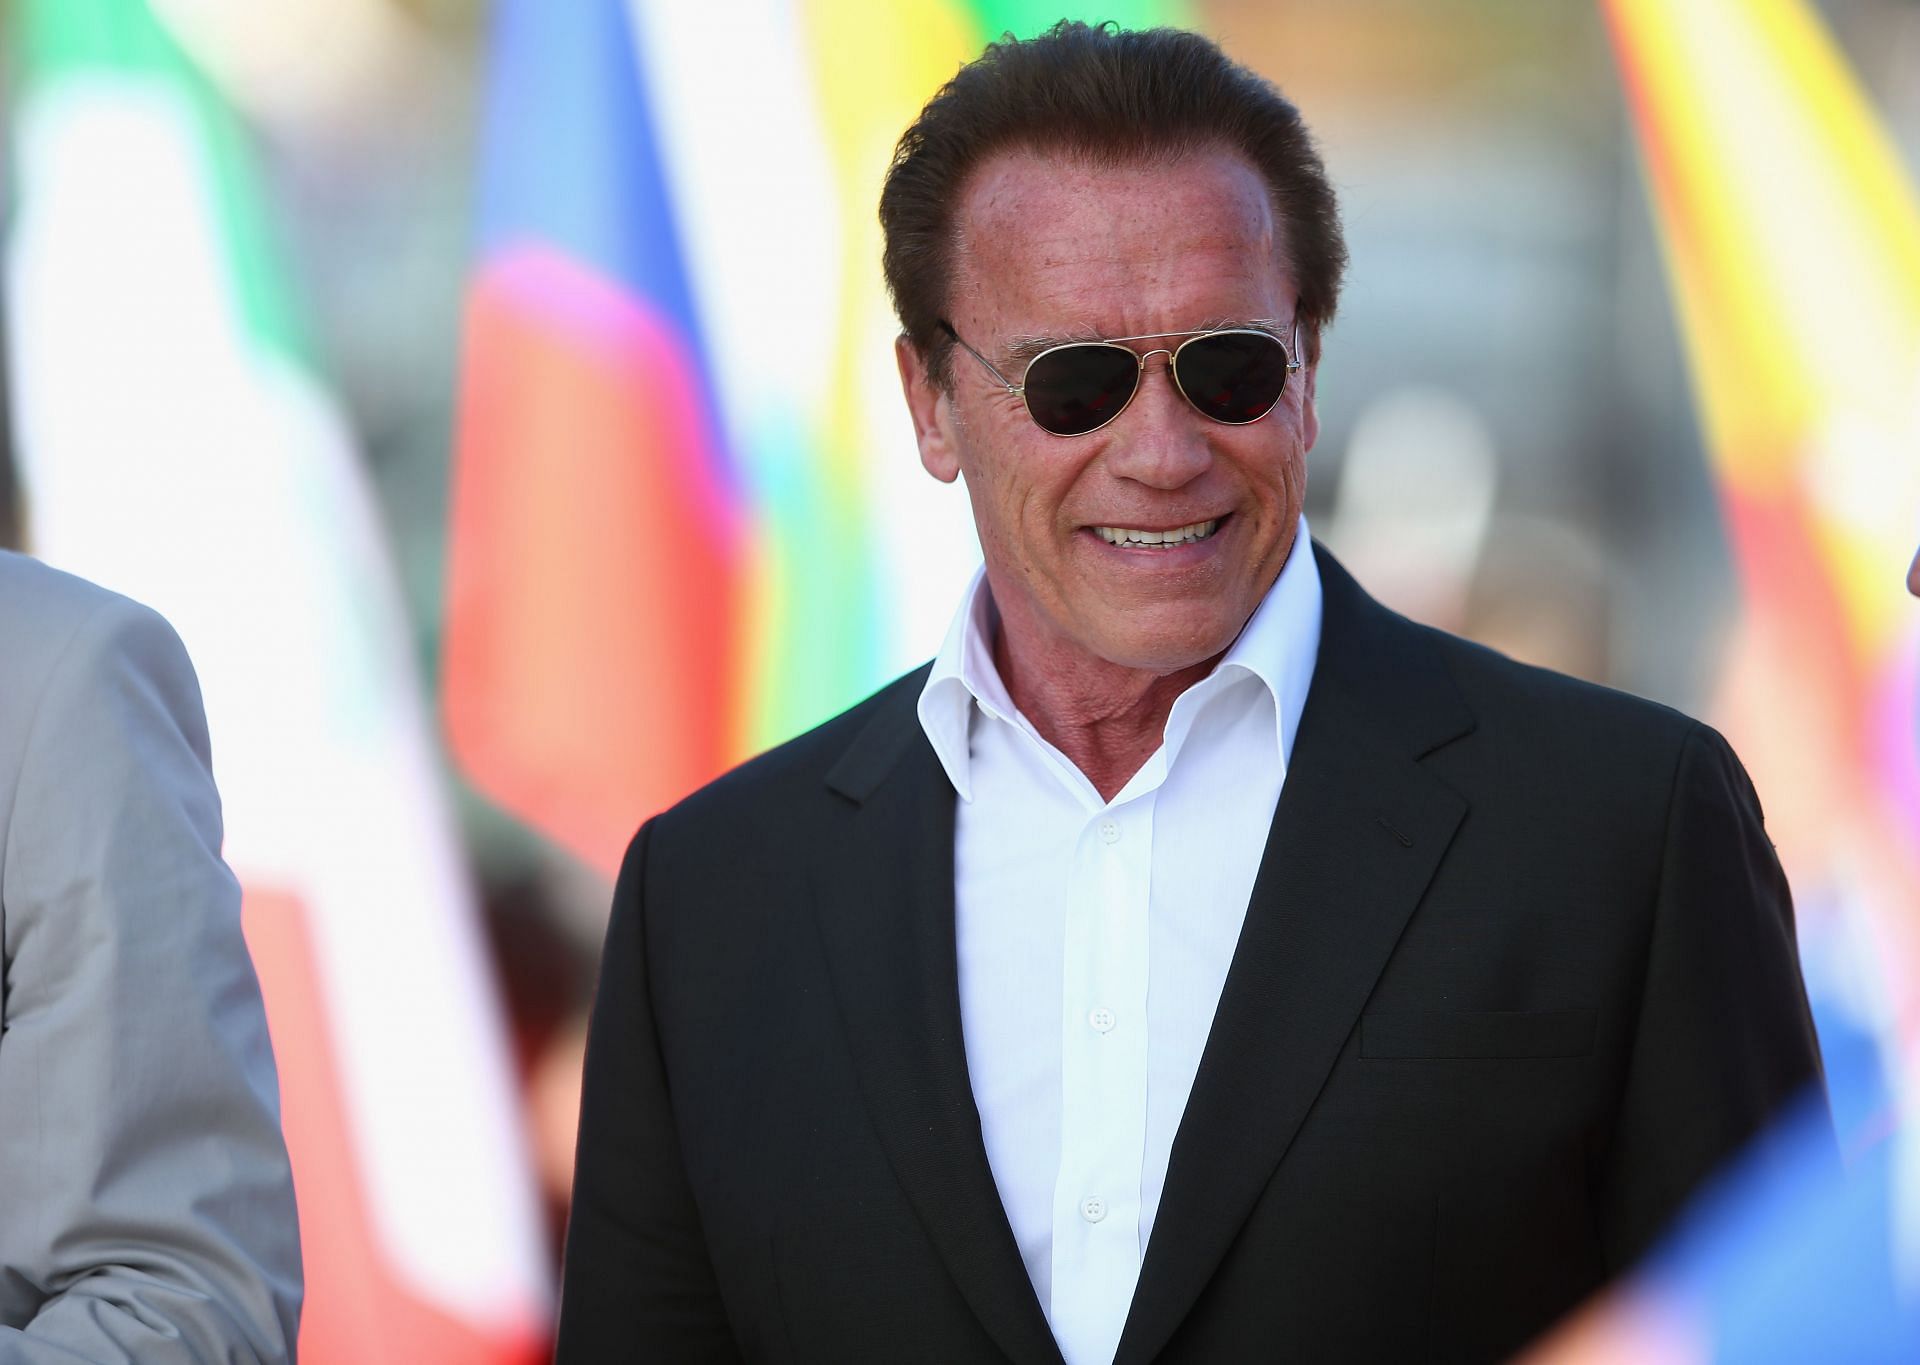 WHEN ARNOLD SCHWARZENEGGER WENT OUT IN PUBLIC - PEOPLE'S REACTIONS  MOTIVATION 